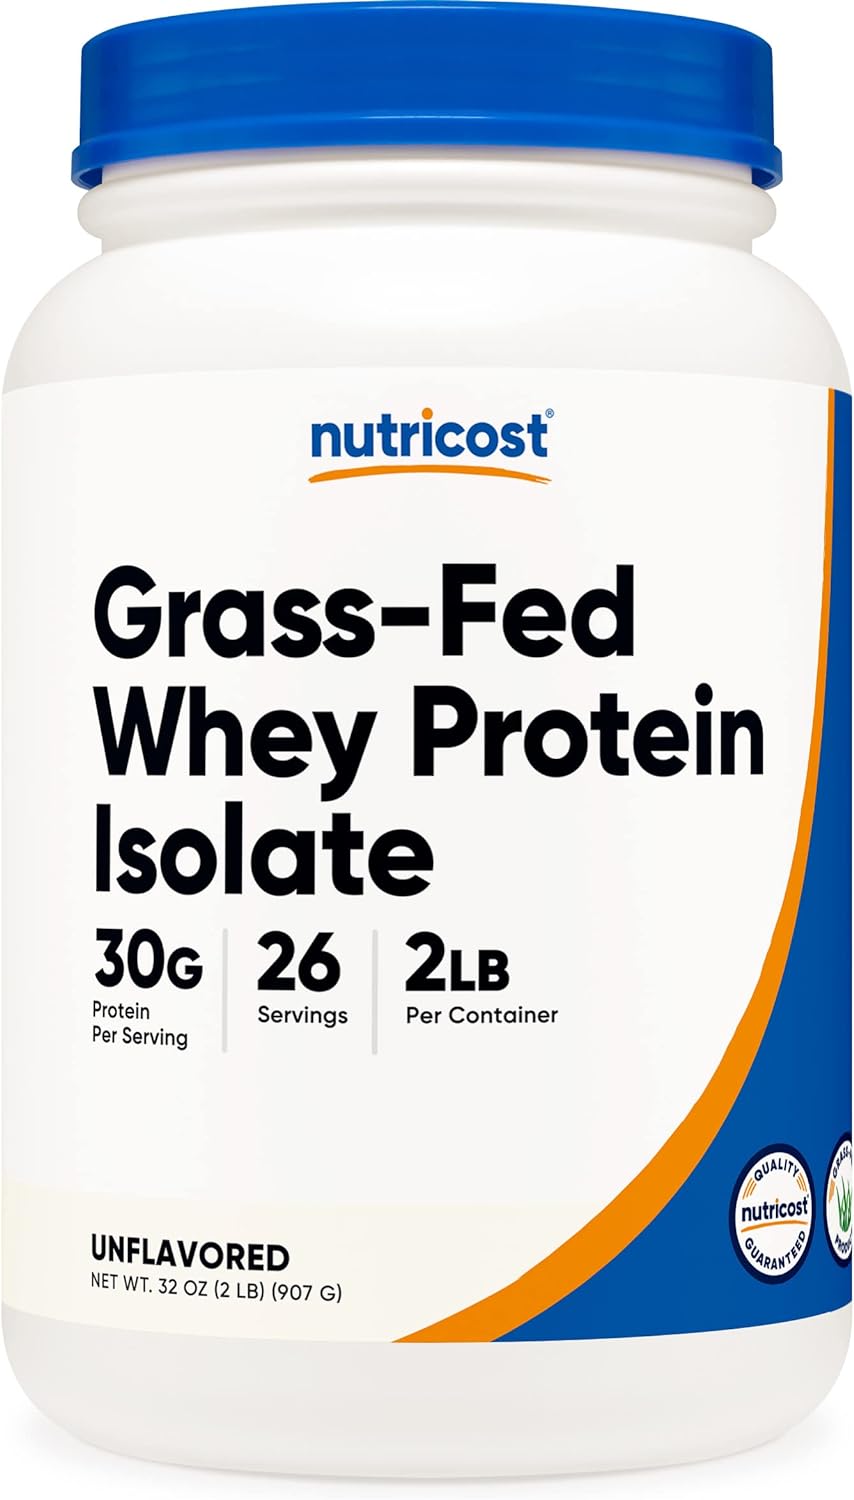 Nutricost Grass-Fed Whey Protein Isolate (Unflavored) 2LBS - Non-GMO,